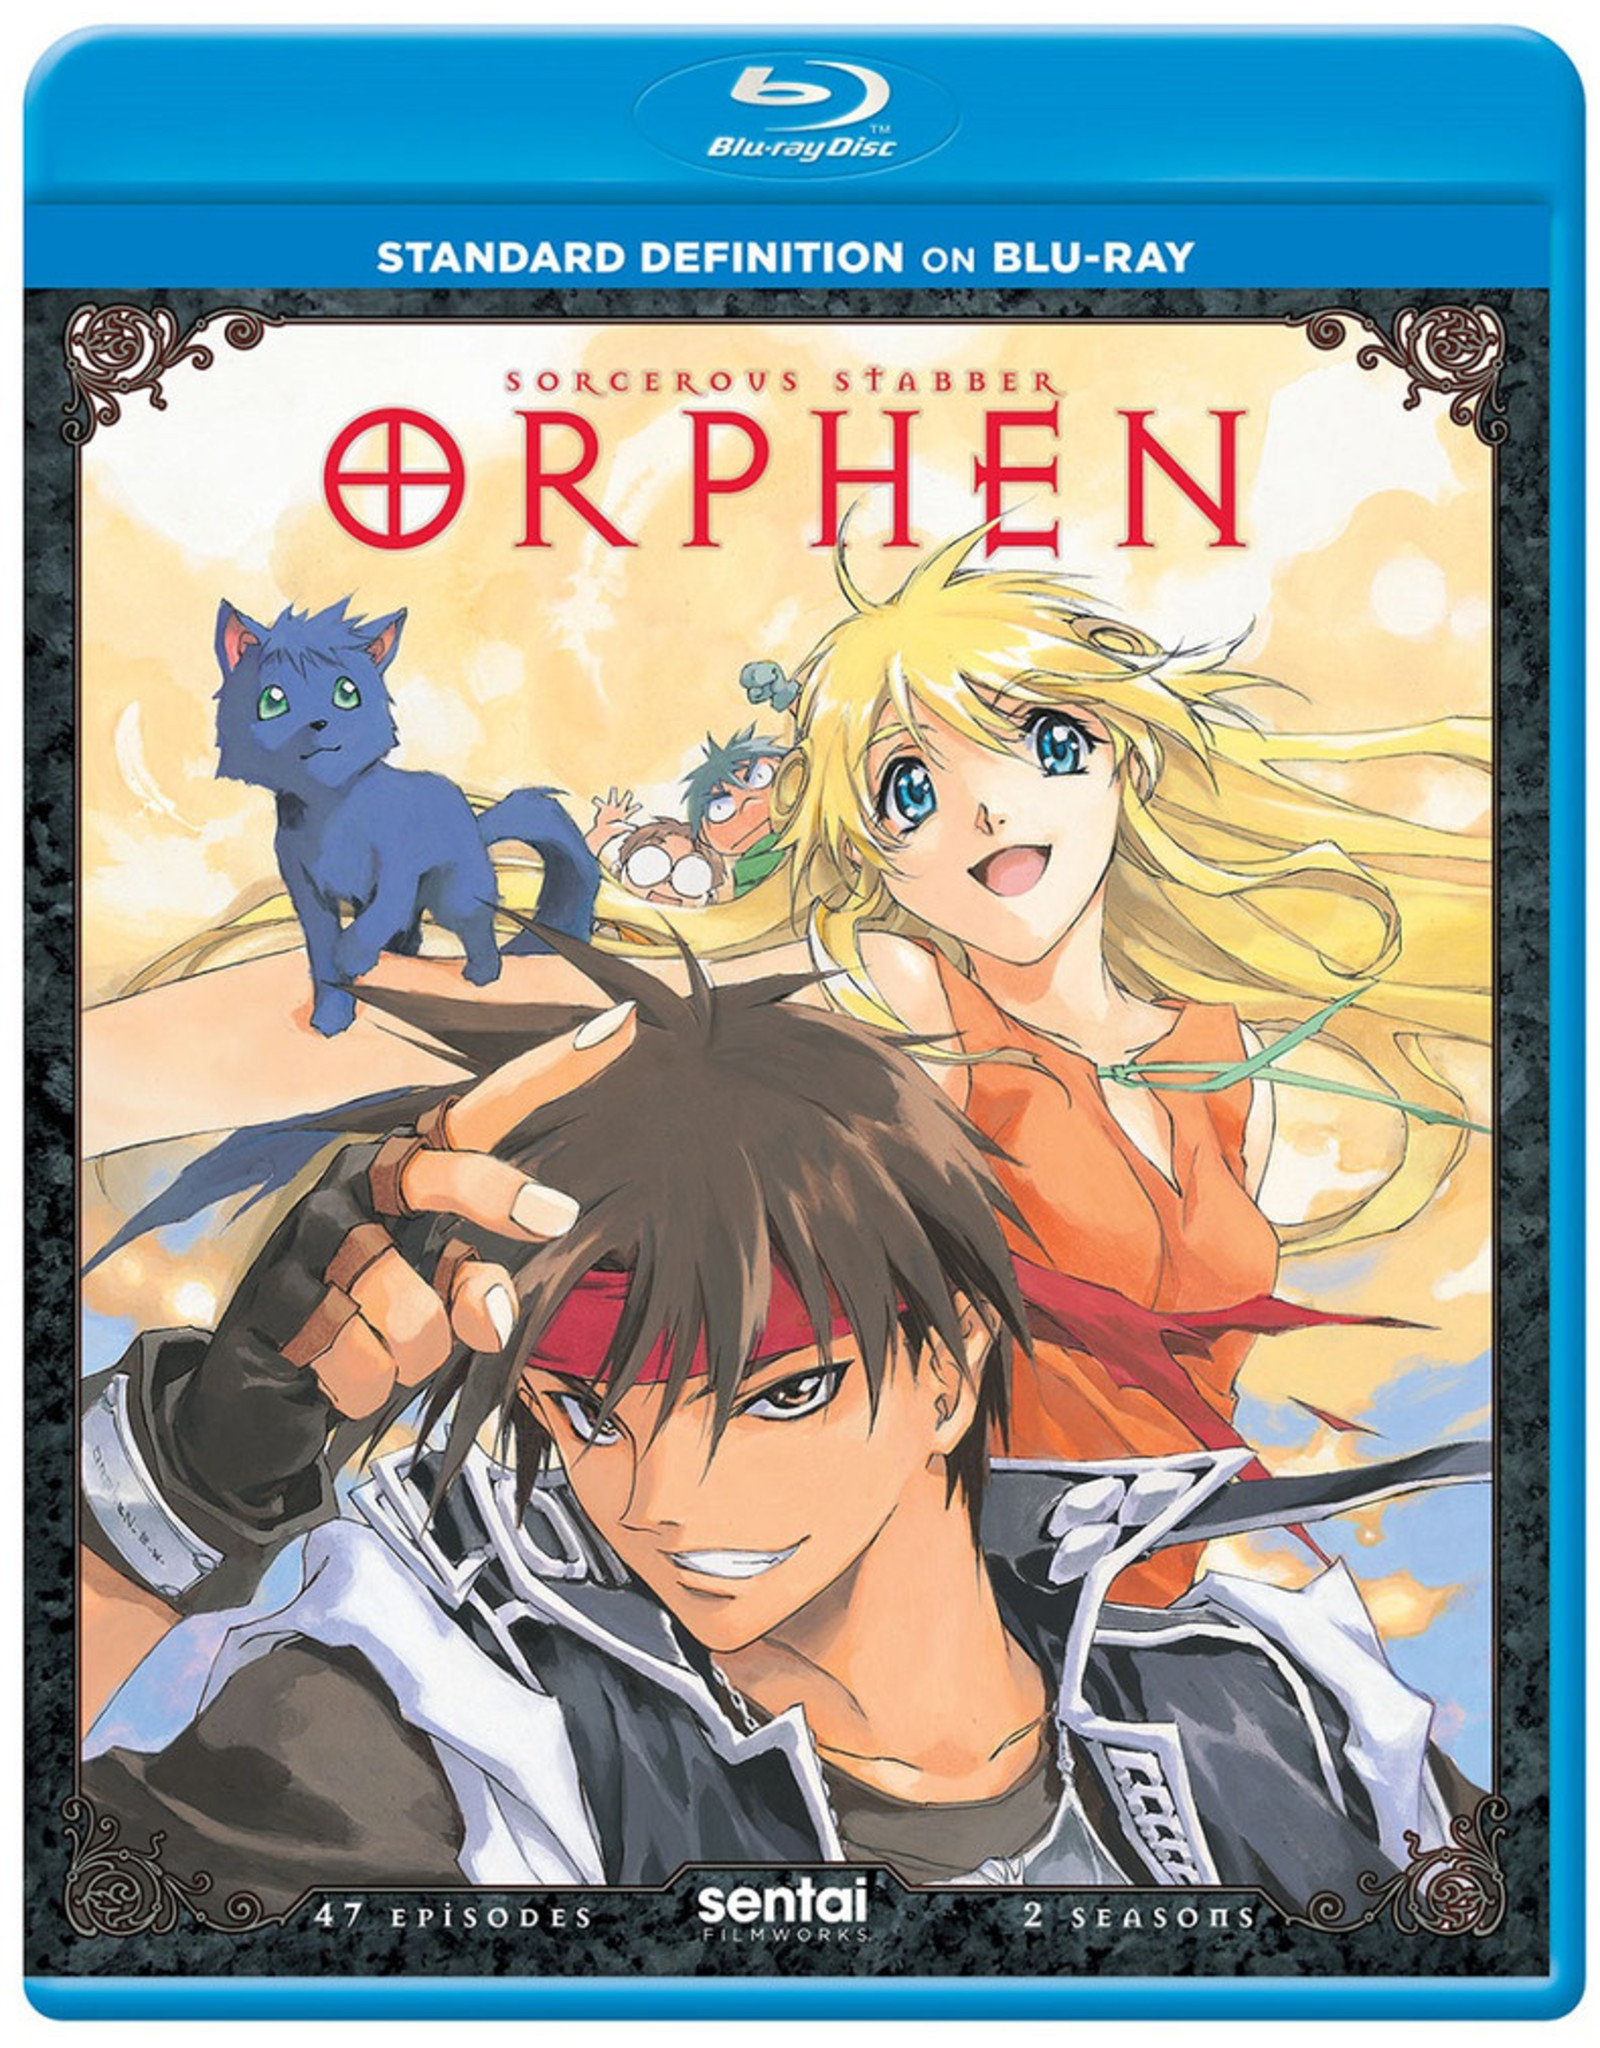 Sorcerous Stabber Orphen Complete Collection Blu-ray